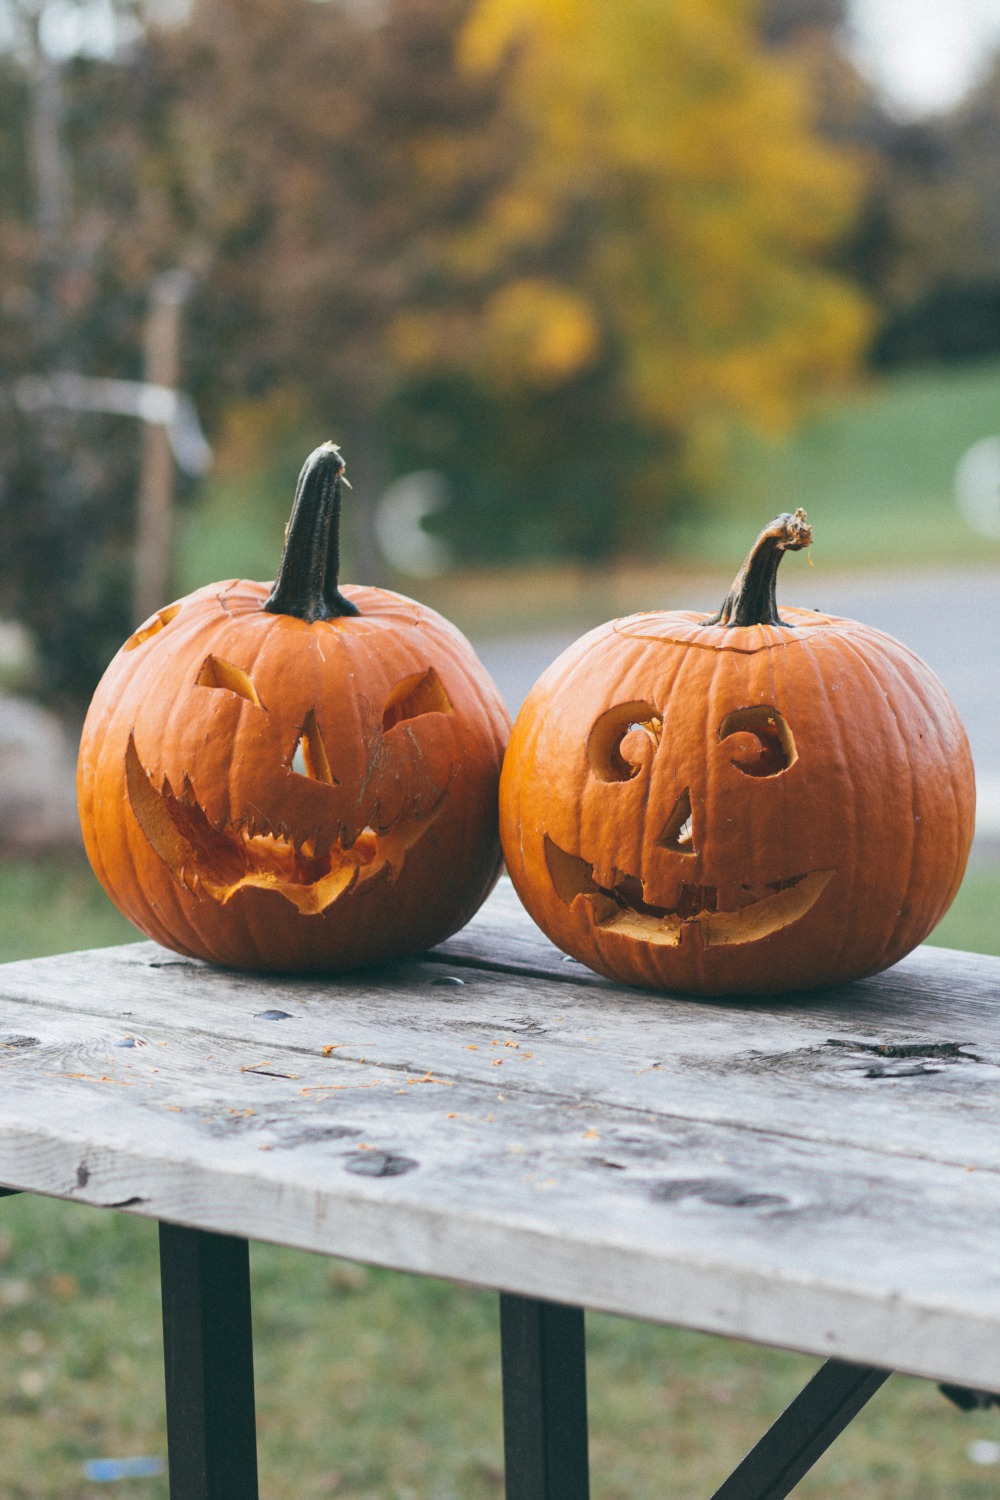 Explore A Family Halloween at Wagner Farm in Glenview, IL on October 24